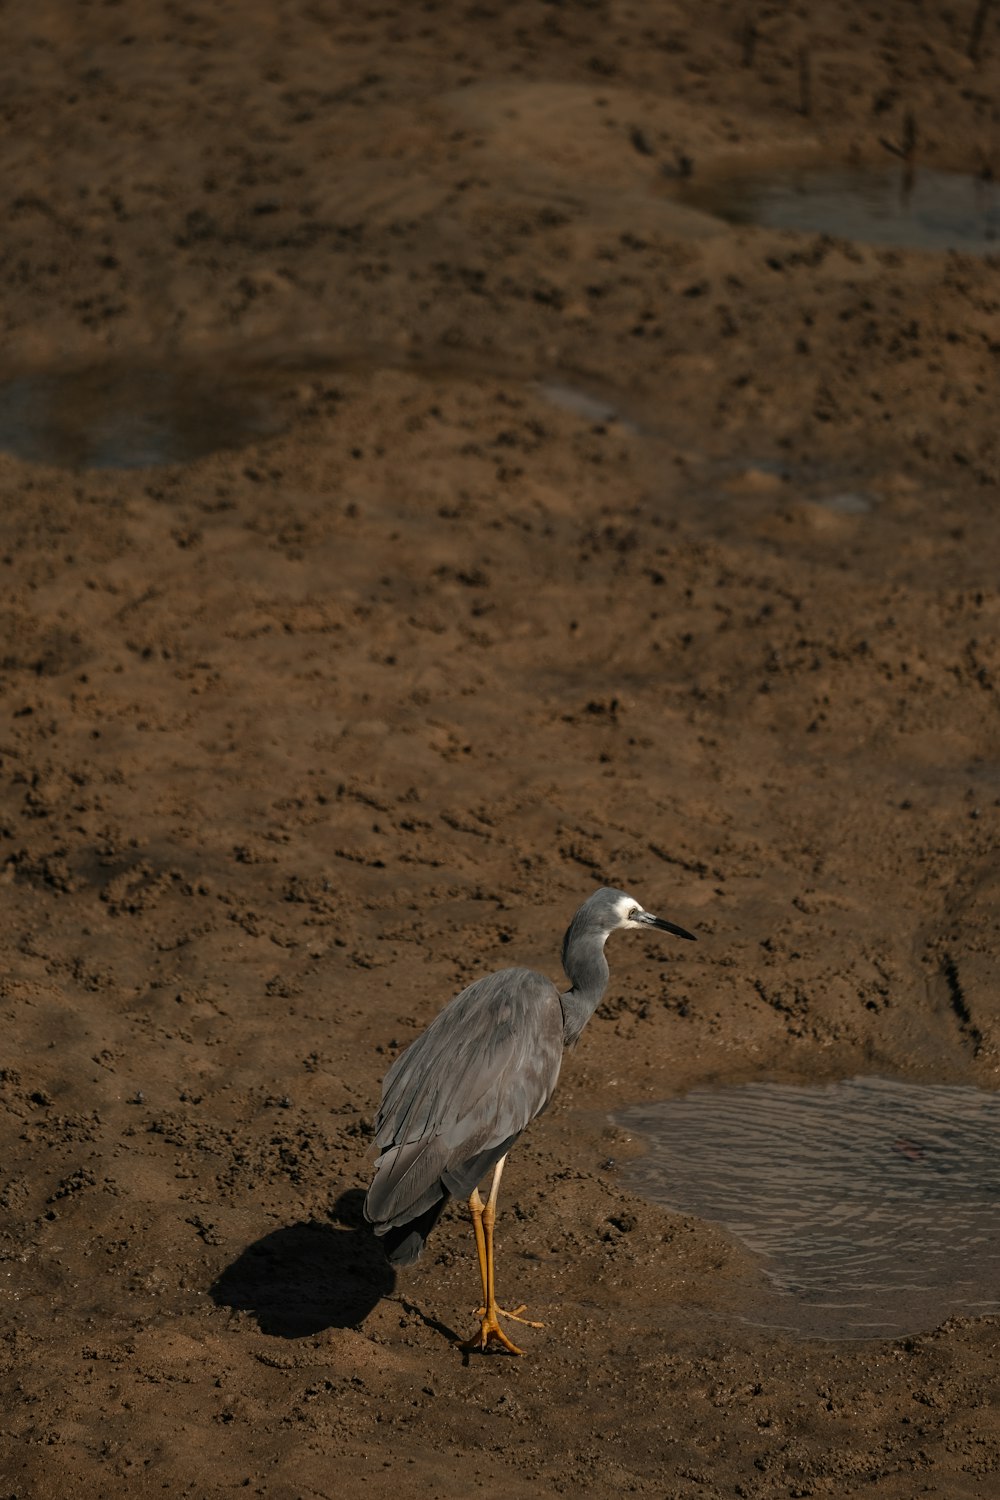 a bird standing in the dirt near a puddle of water